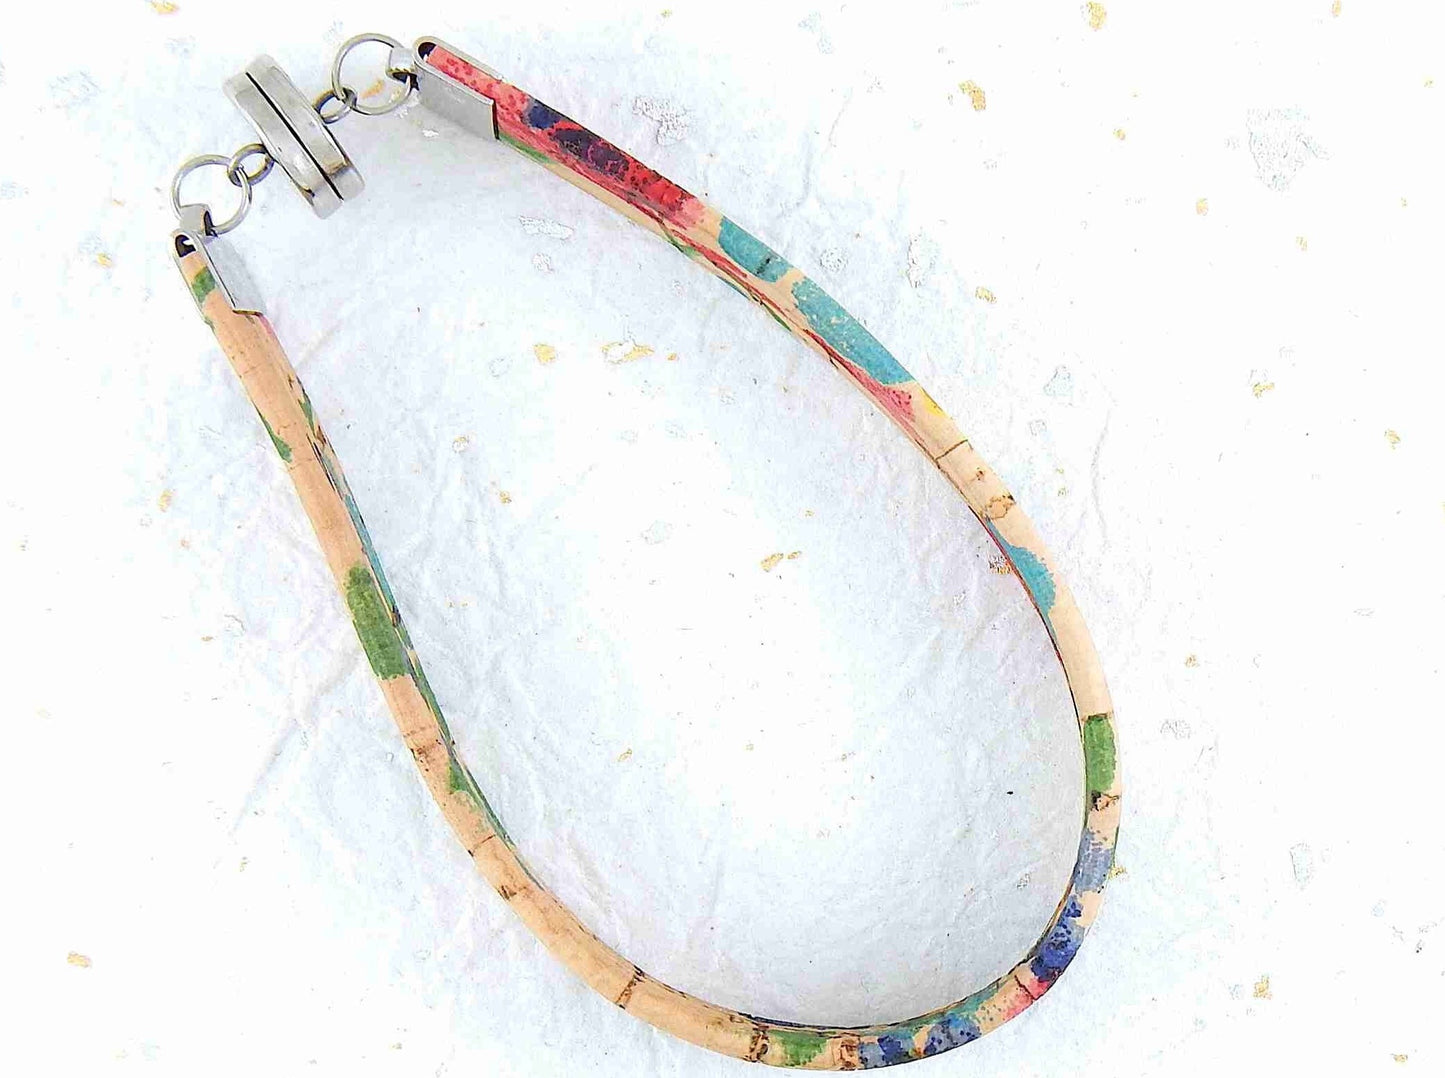 Simple 10 mm flat cork bracelet with magnetic stainless steel clasp in 2 flower patterns (soft or bright colours)